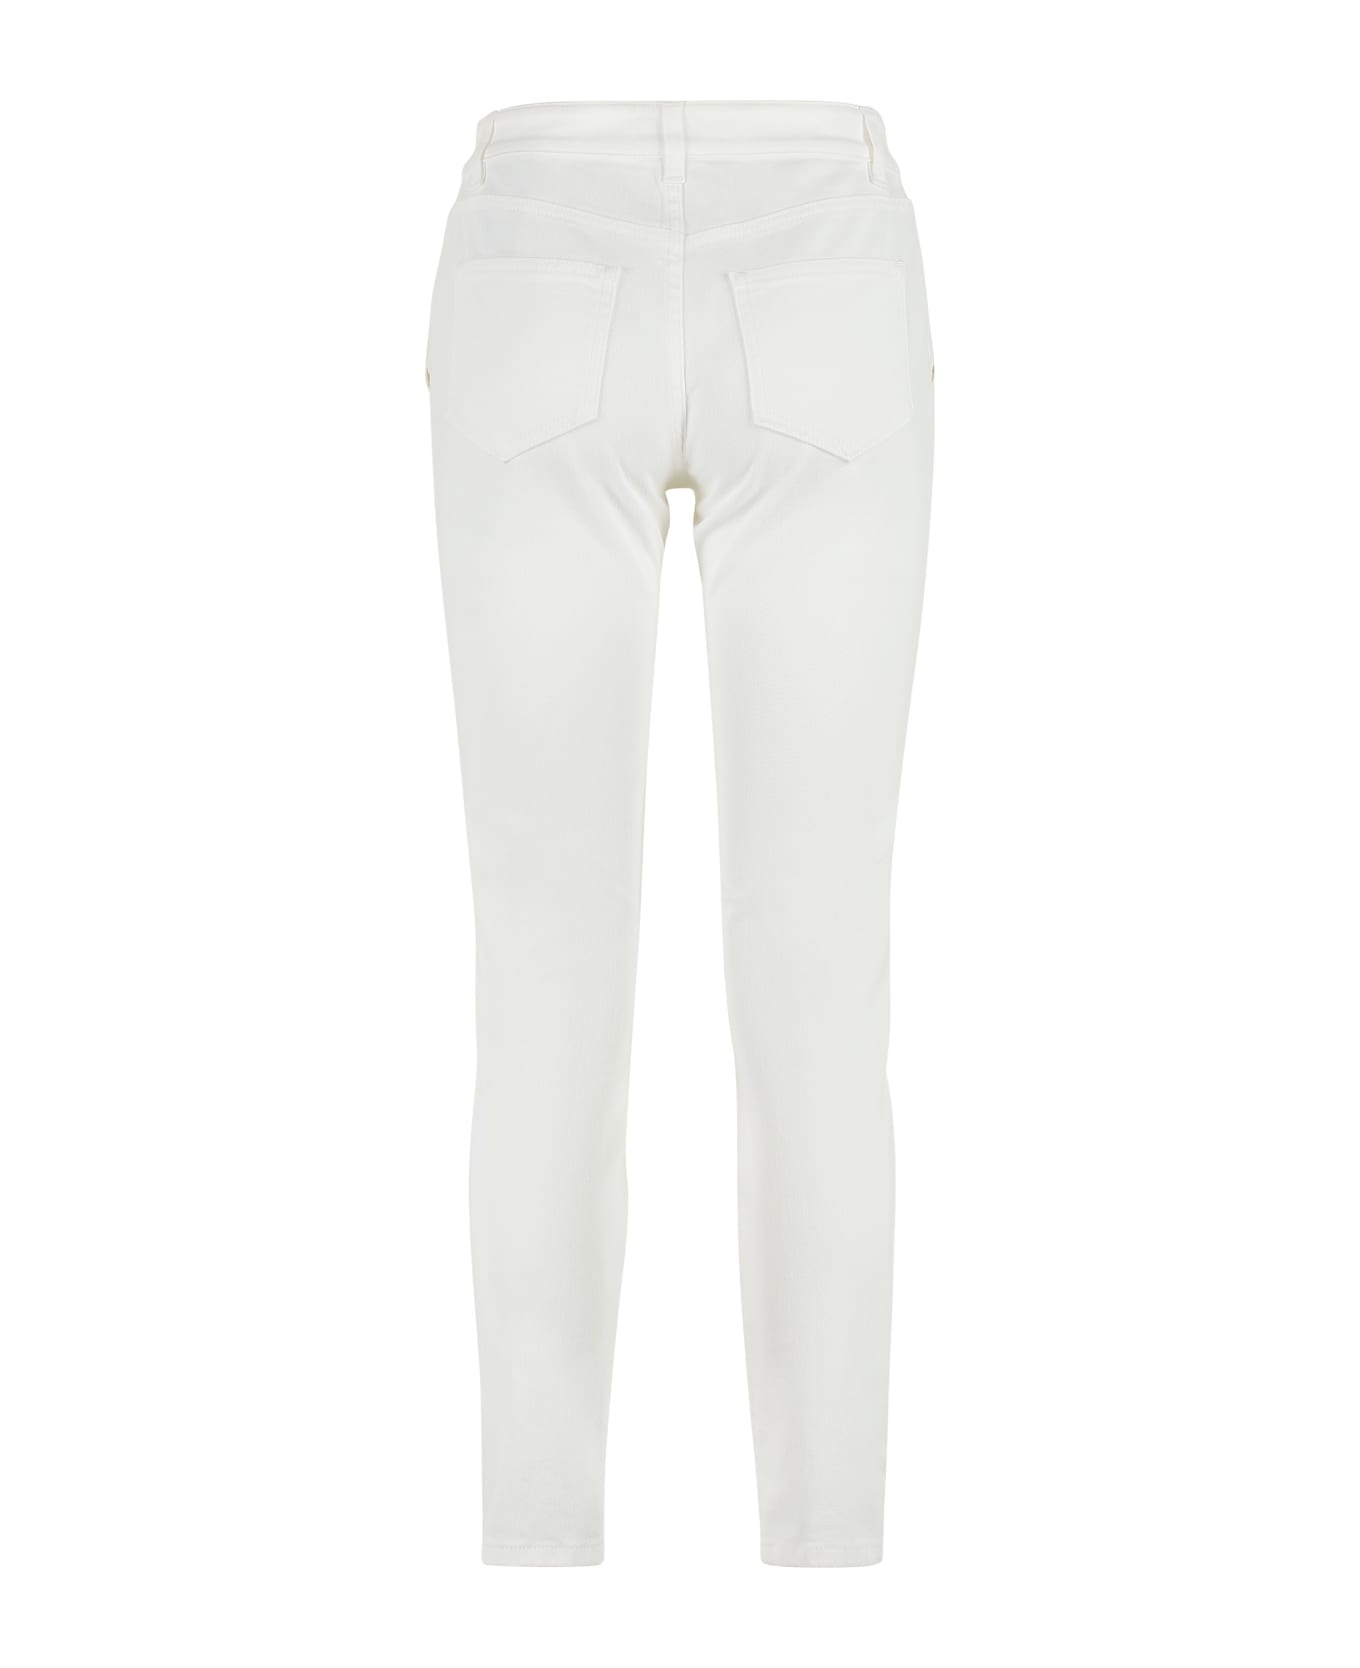 Tom Ford High-rise Skinny-fit Jeans - White デニム